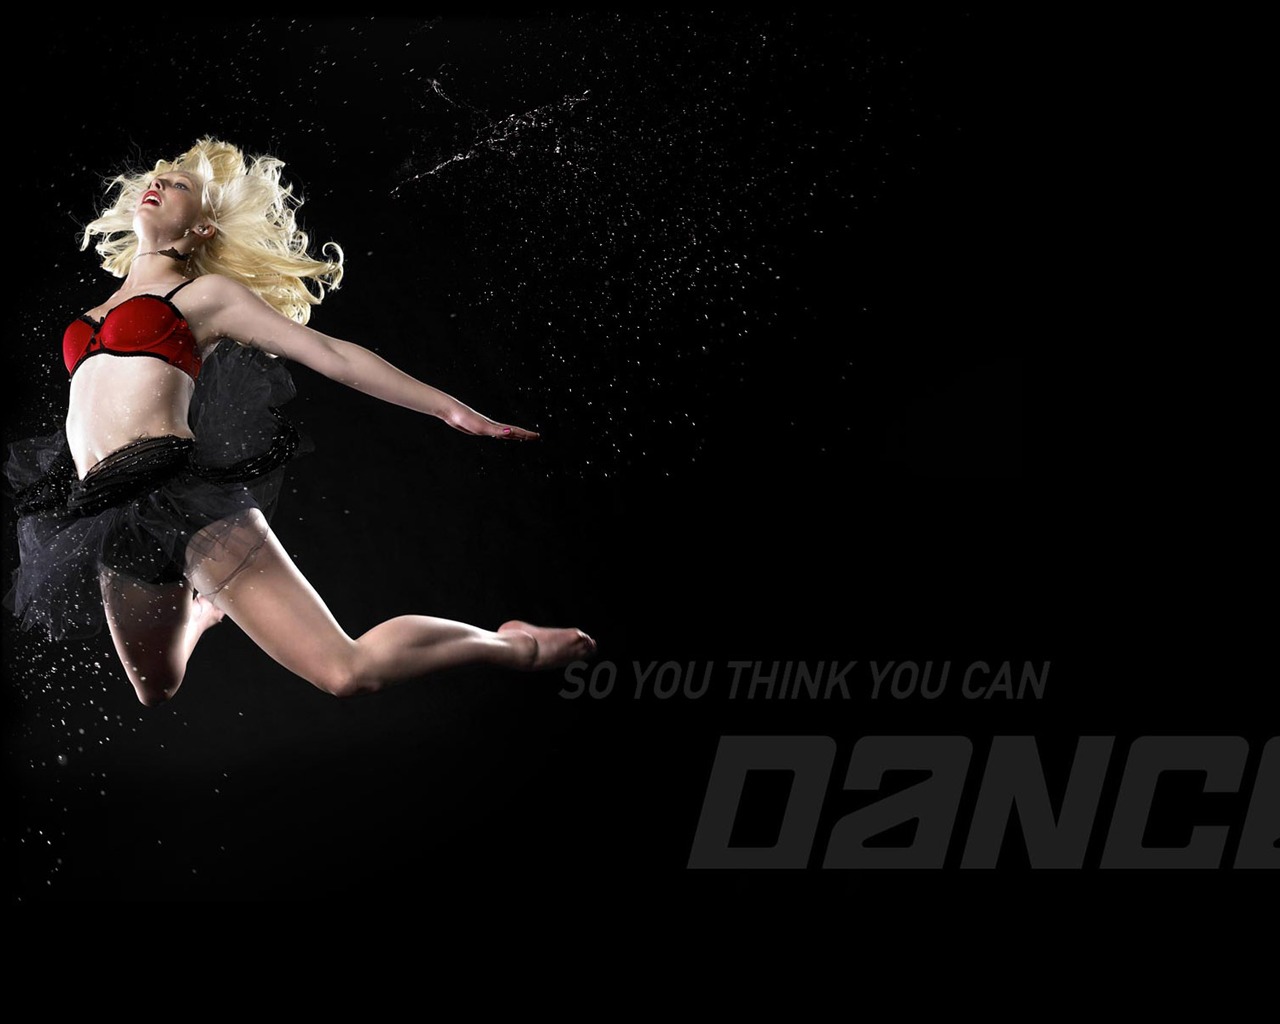 So You Think You Can Dance wallpaper (1) #13 - 1280x1024